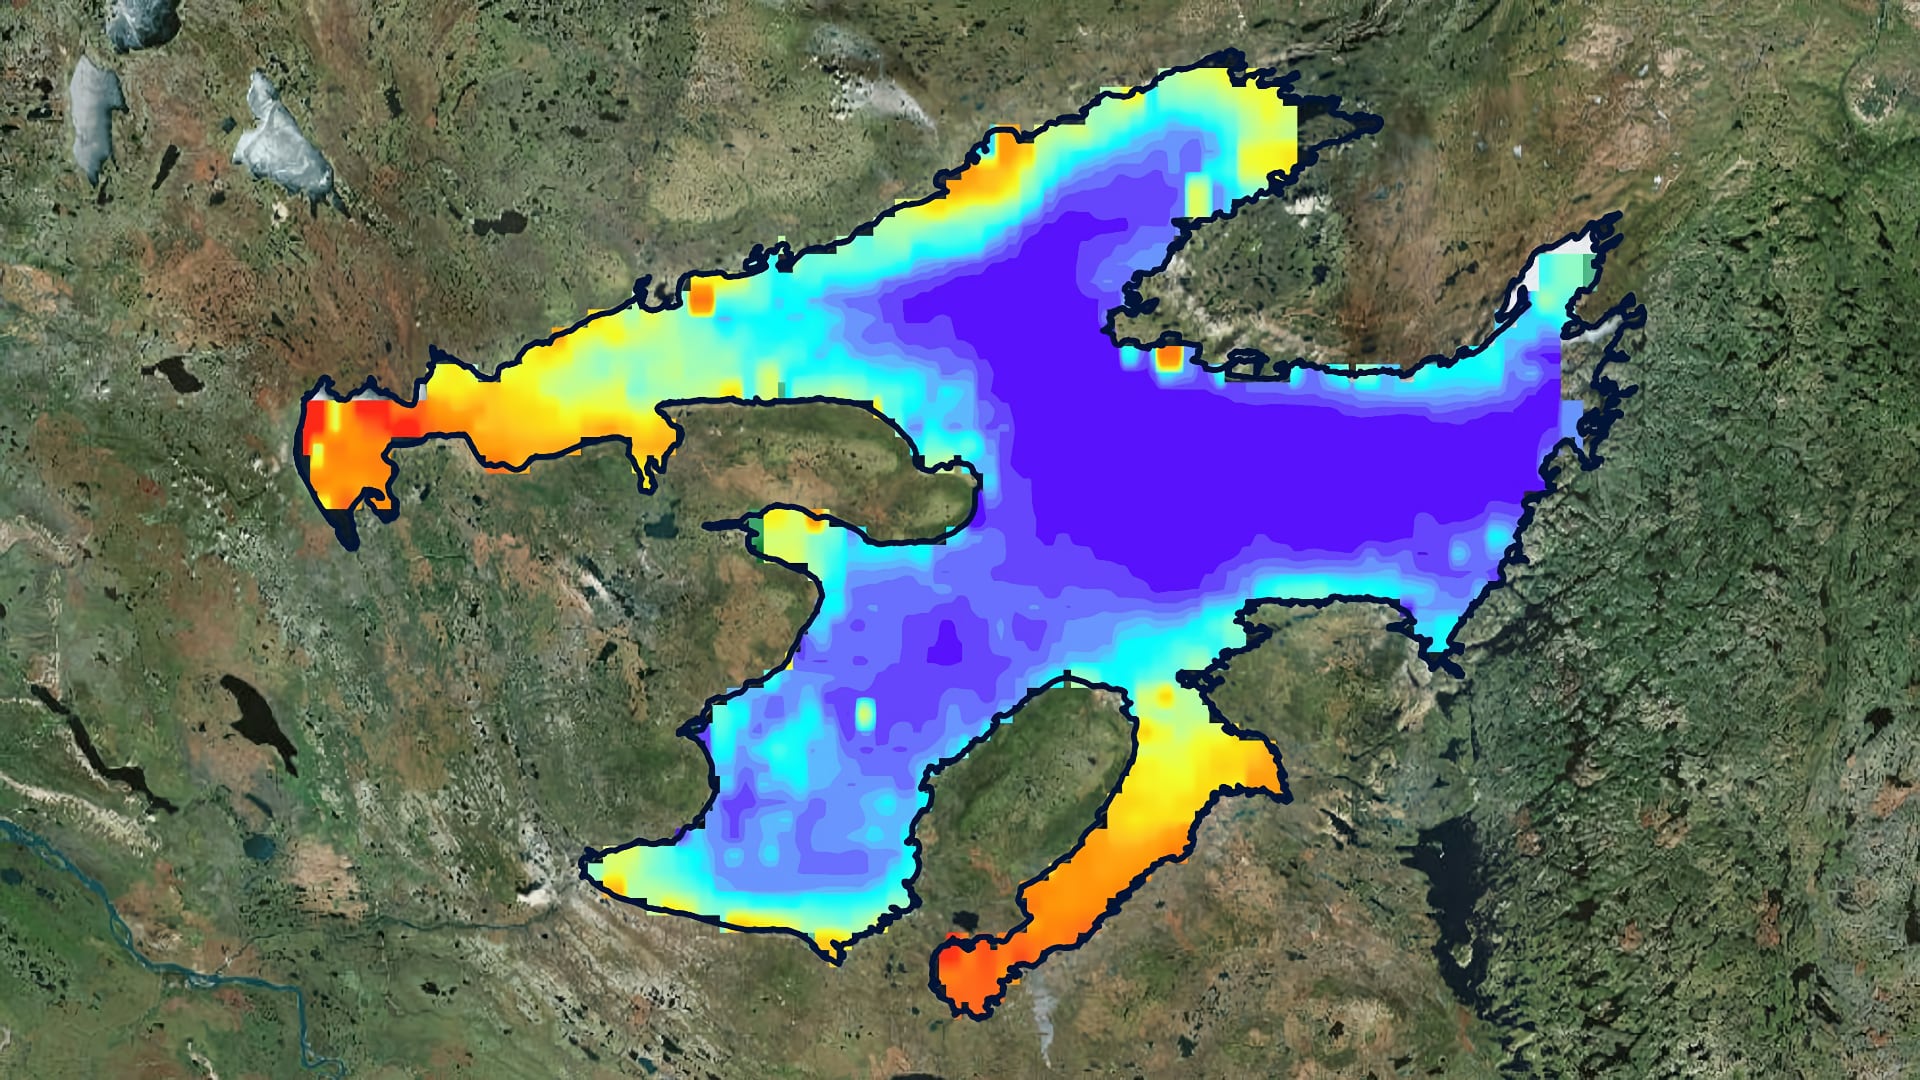 A Long-Term Remote Sensing Analysis to Evaluate Changes in Water Quality of Great Bear Lake